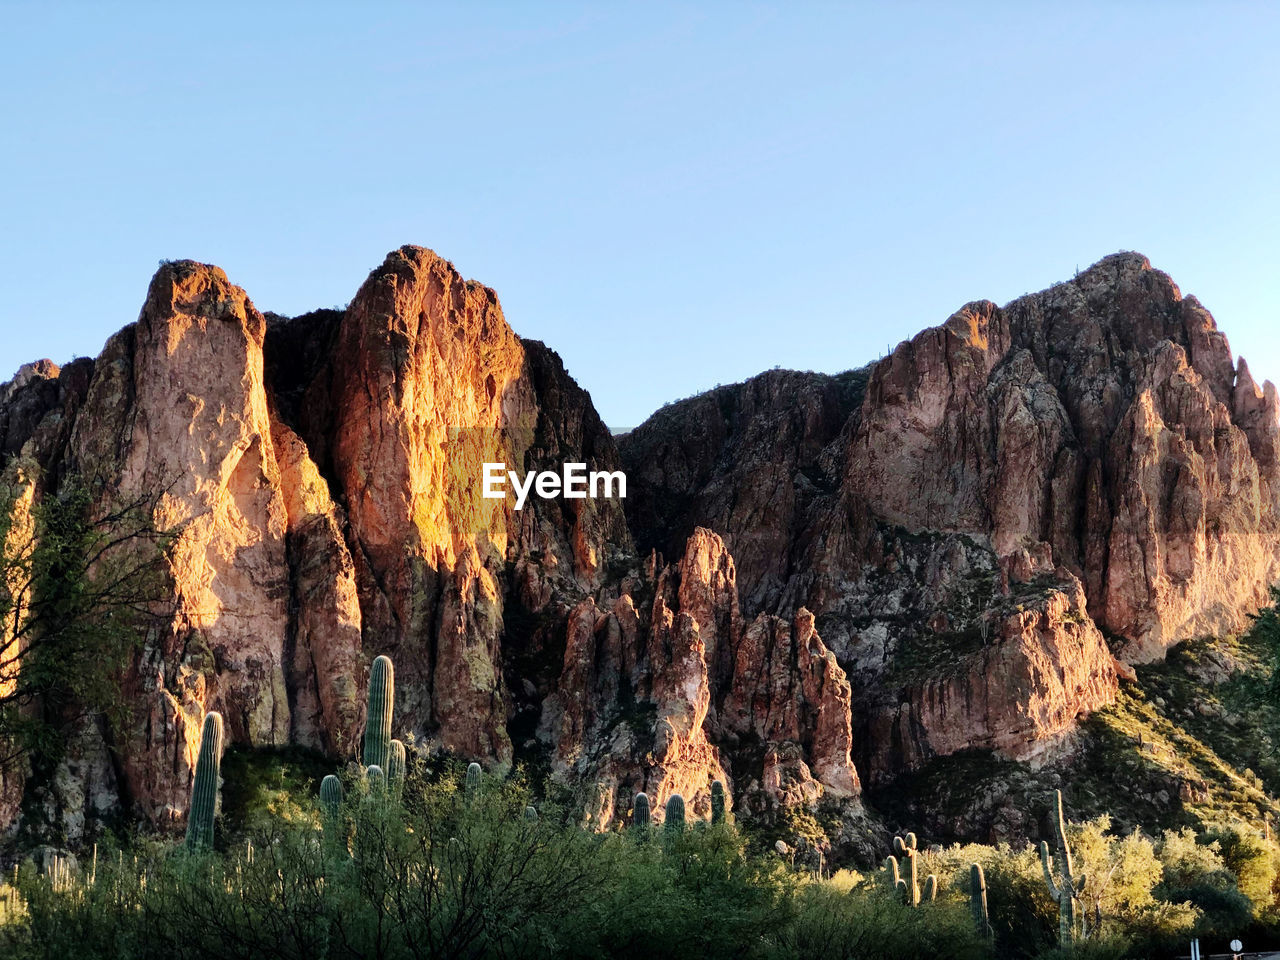 Superstition mountains in superstition wilderness located east of the phoenix metropolitan area